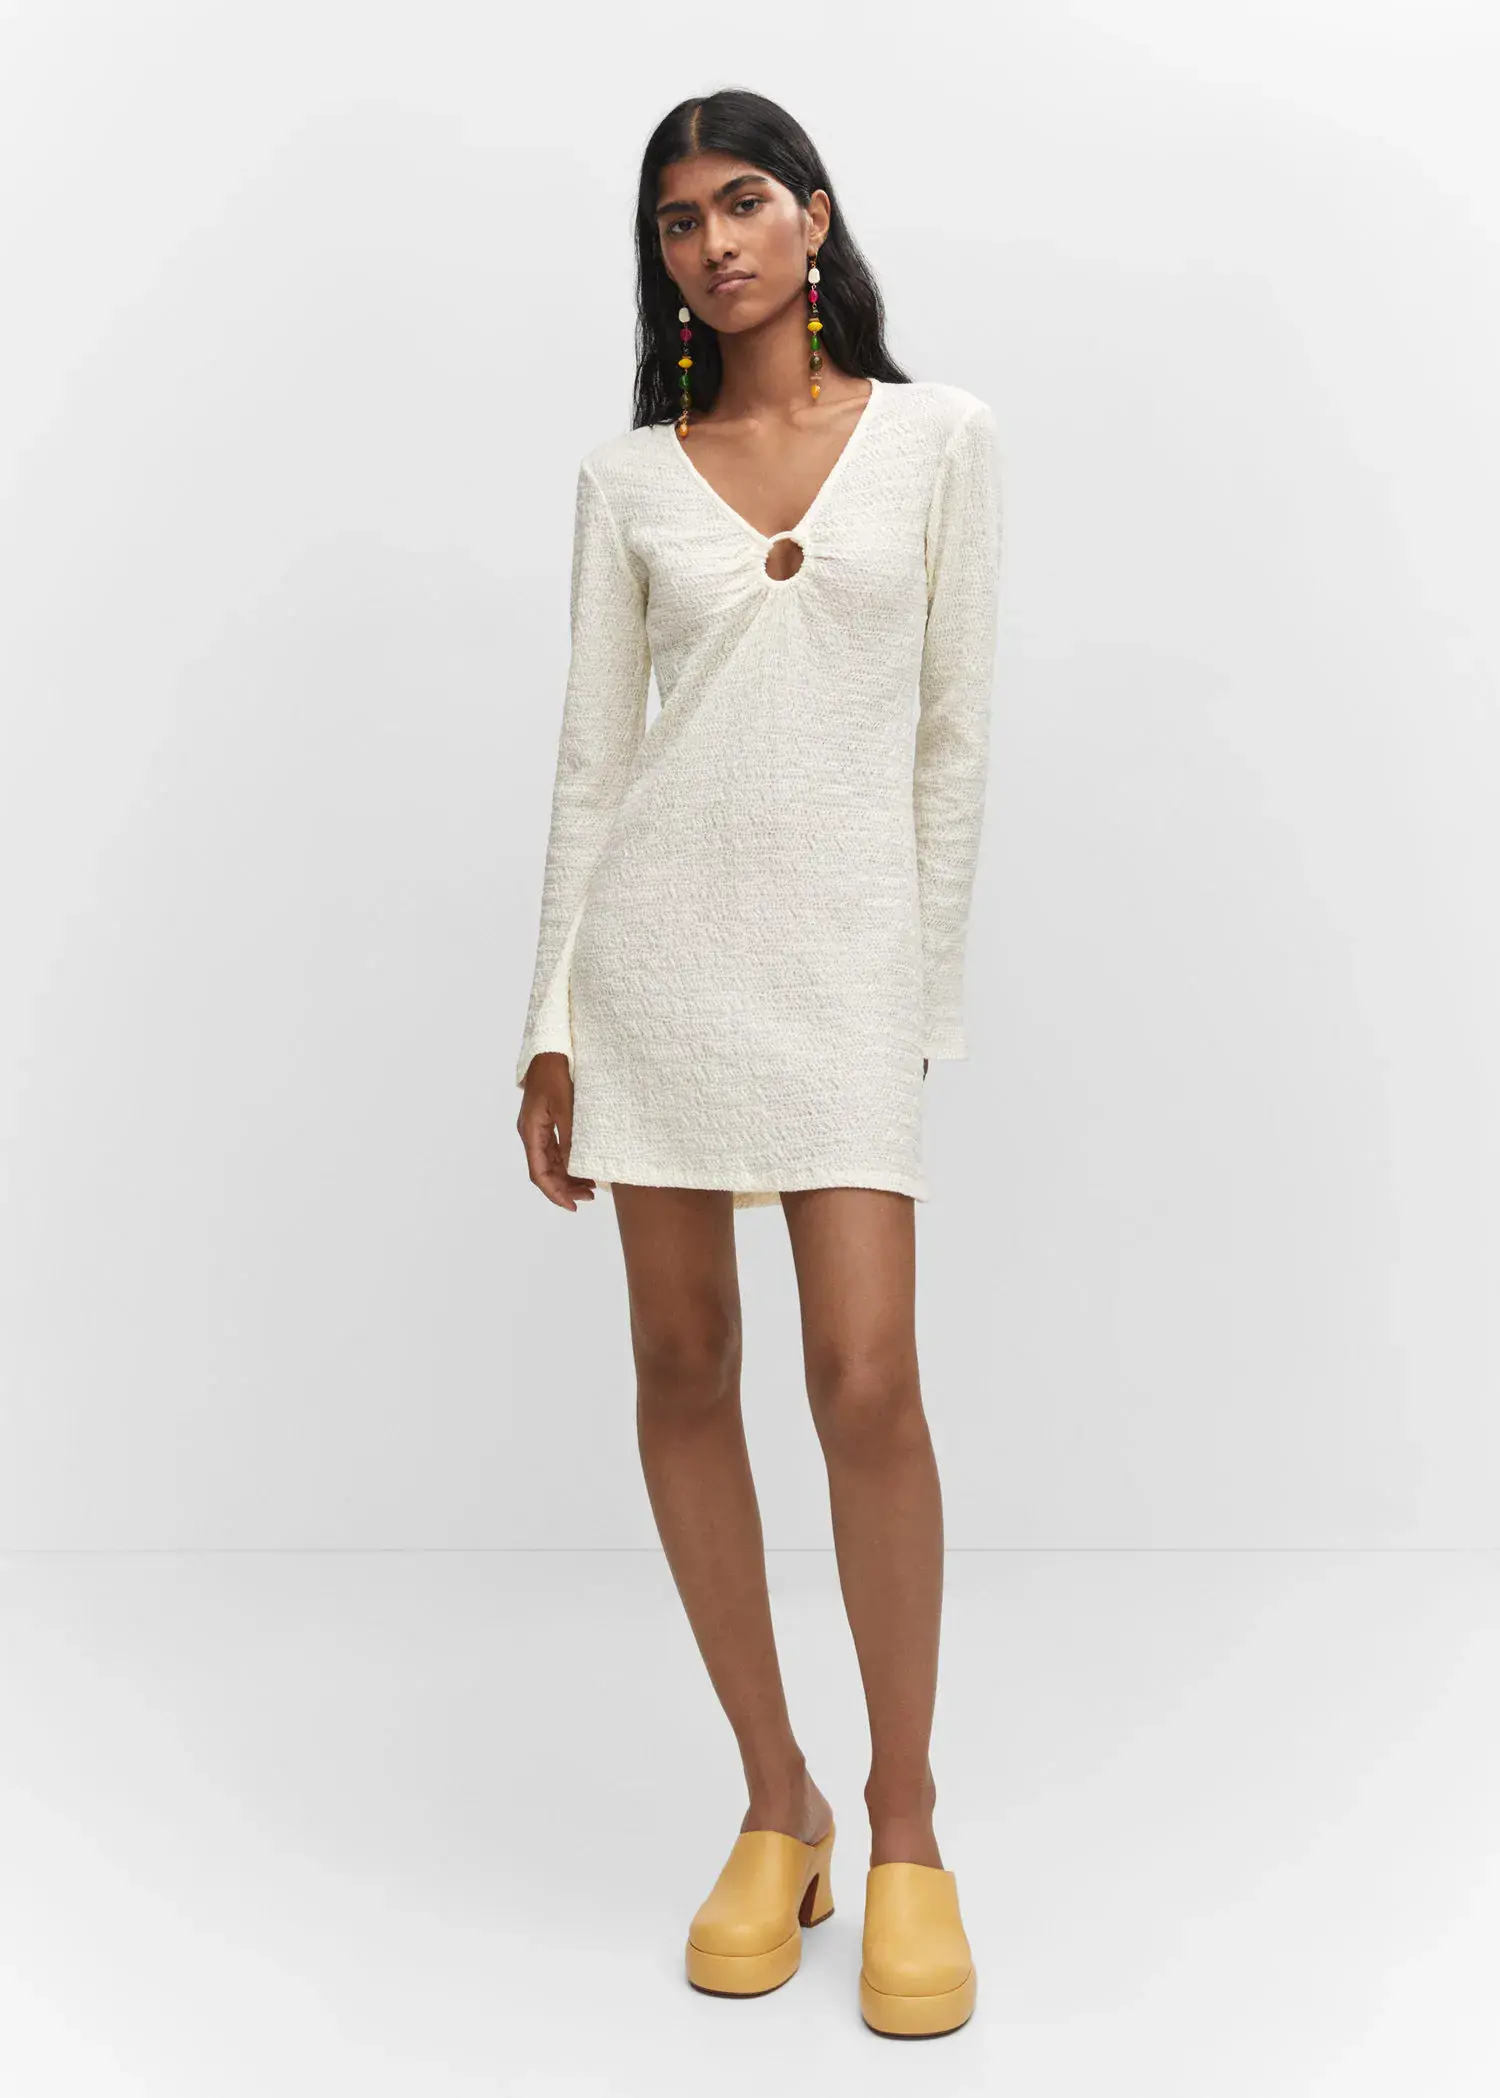 Mango Textured dress with hoop detail. a woman in a white dress standing in a room. 